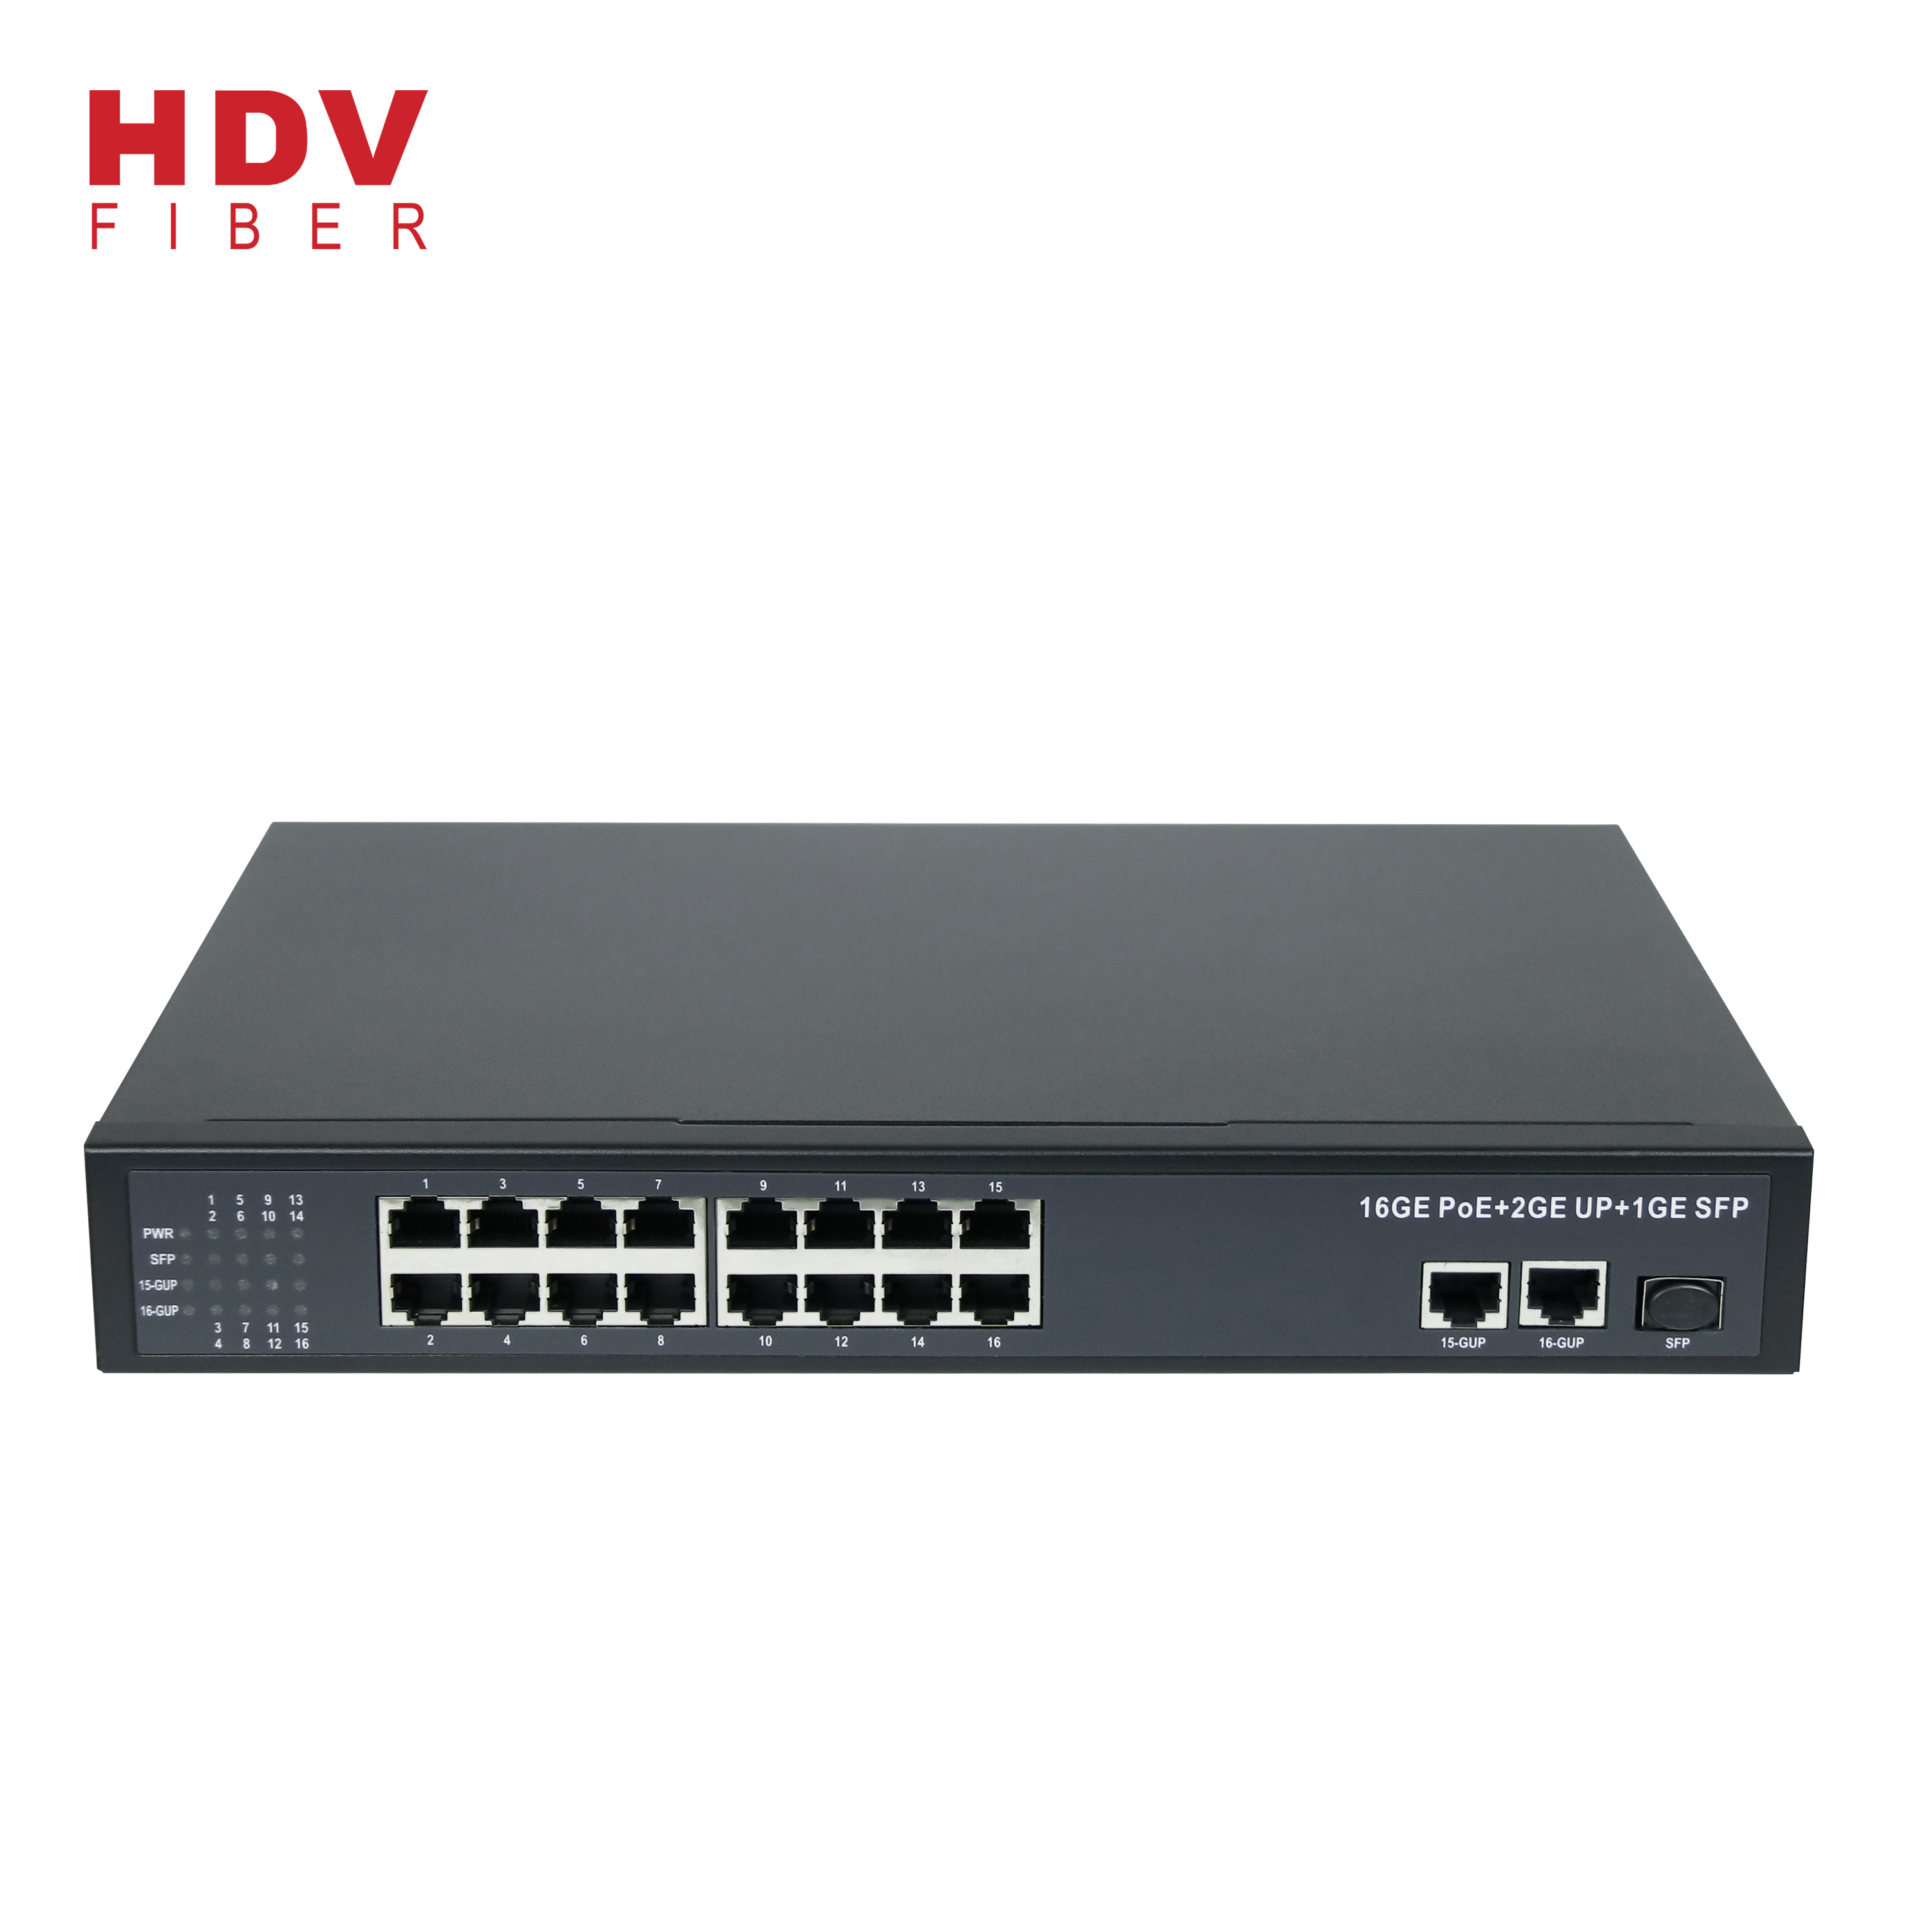 China Manufacturer Factory 16GE POE+2GE UP Link+1G SFP Gigabit POE Network Switch Featured Image